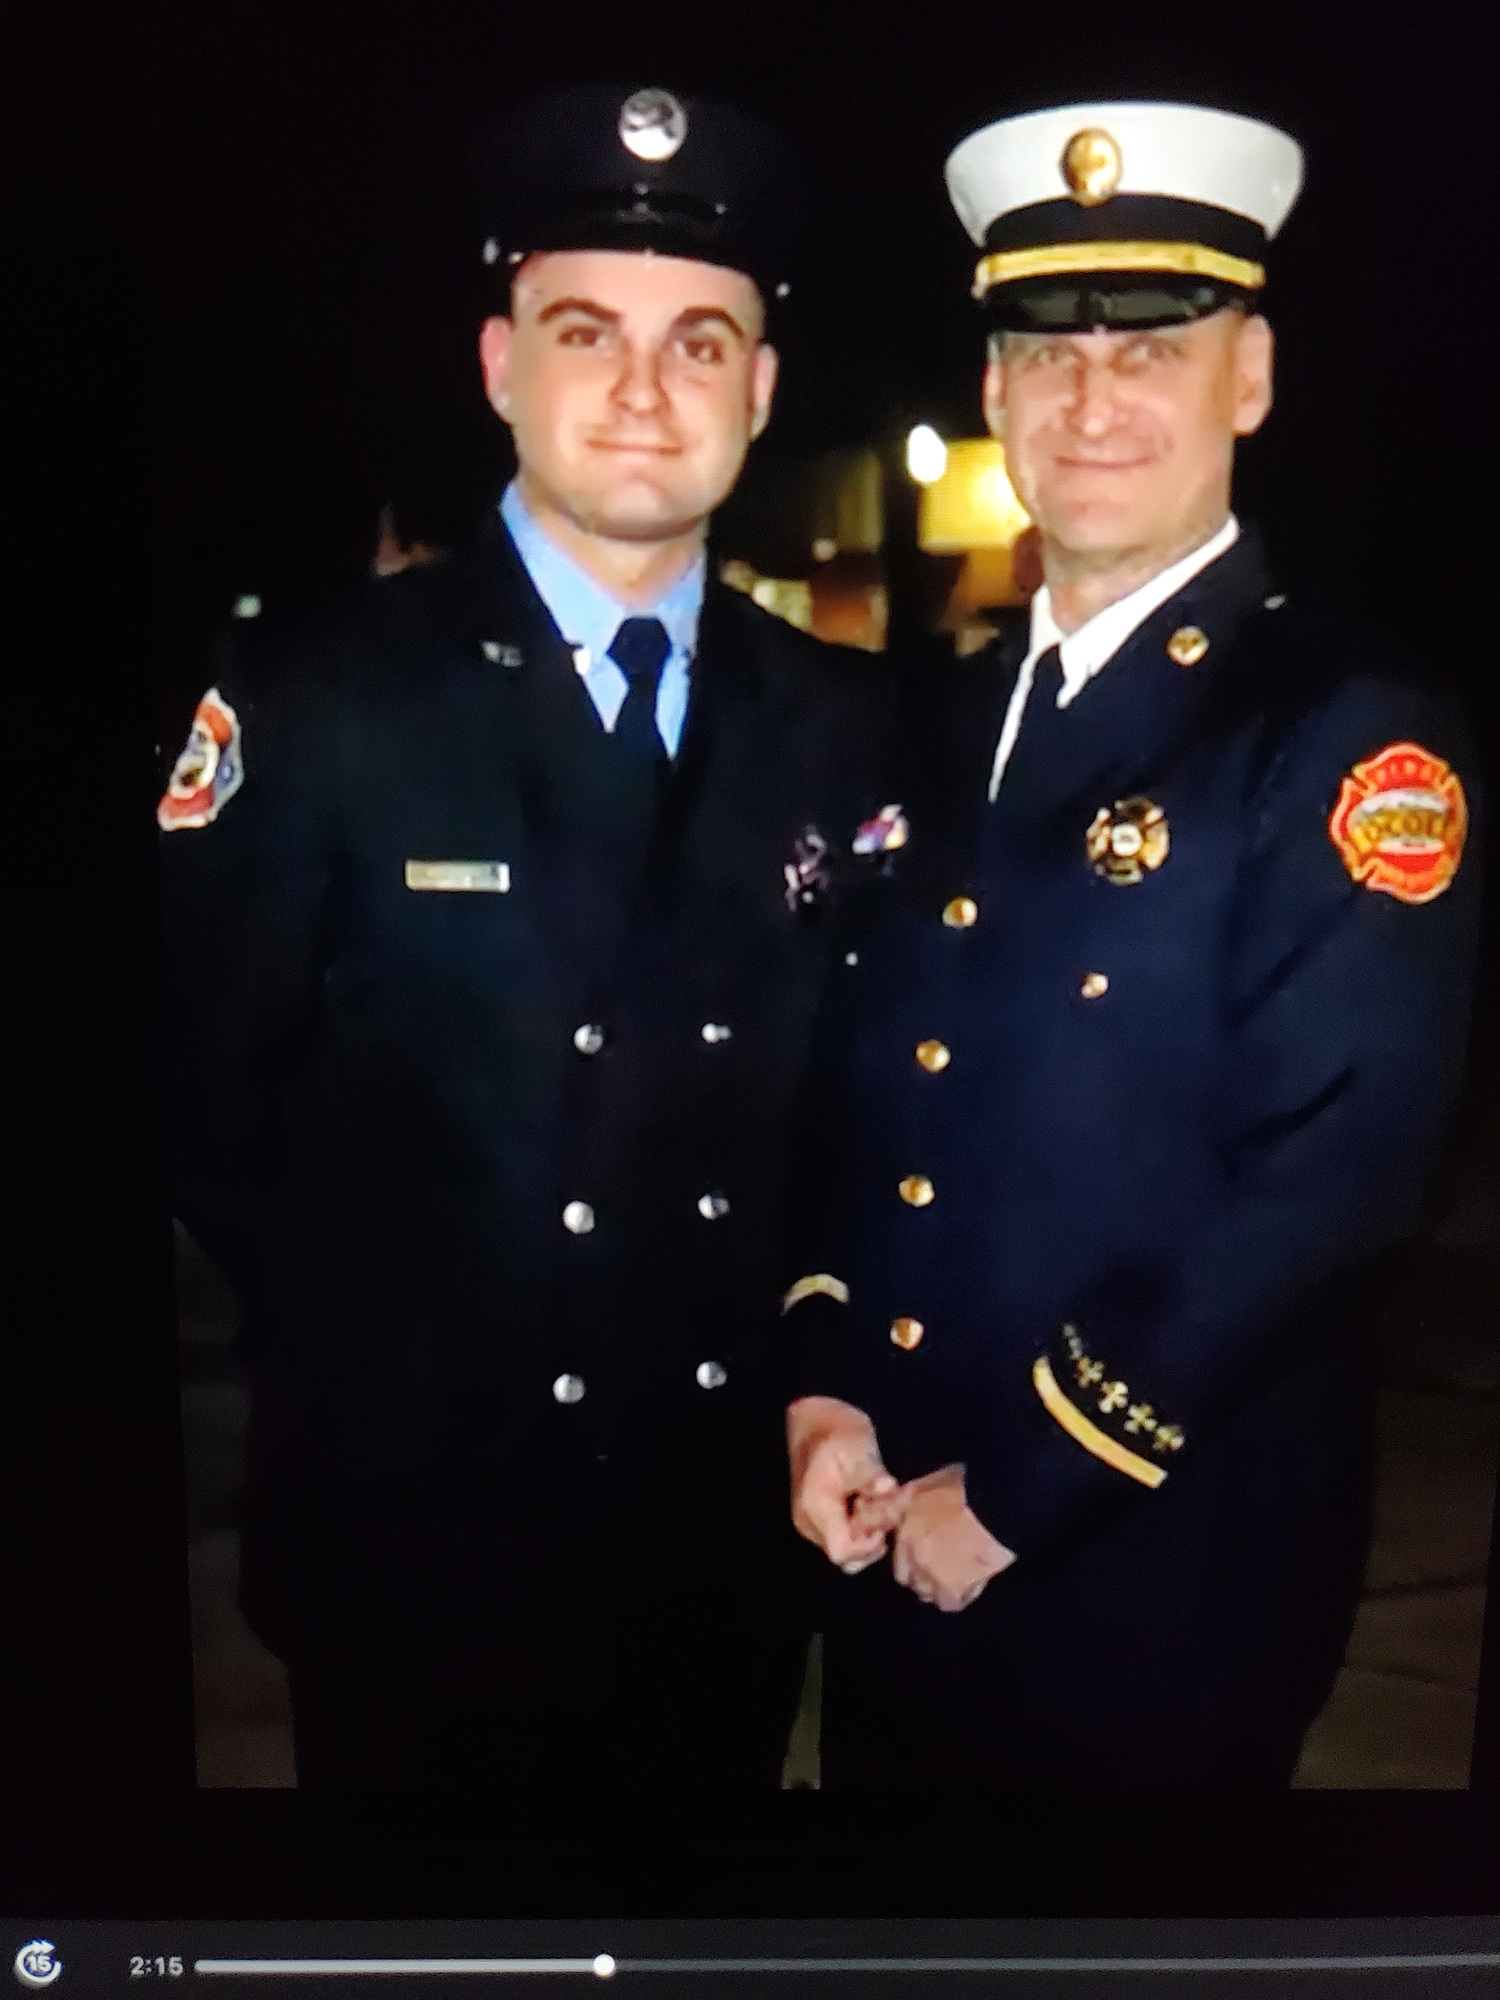 Joe Moy's son, Christopher, left, is a firefighter with the Winter Garden Fire Rescue Department.